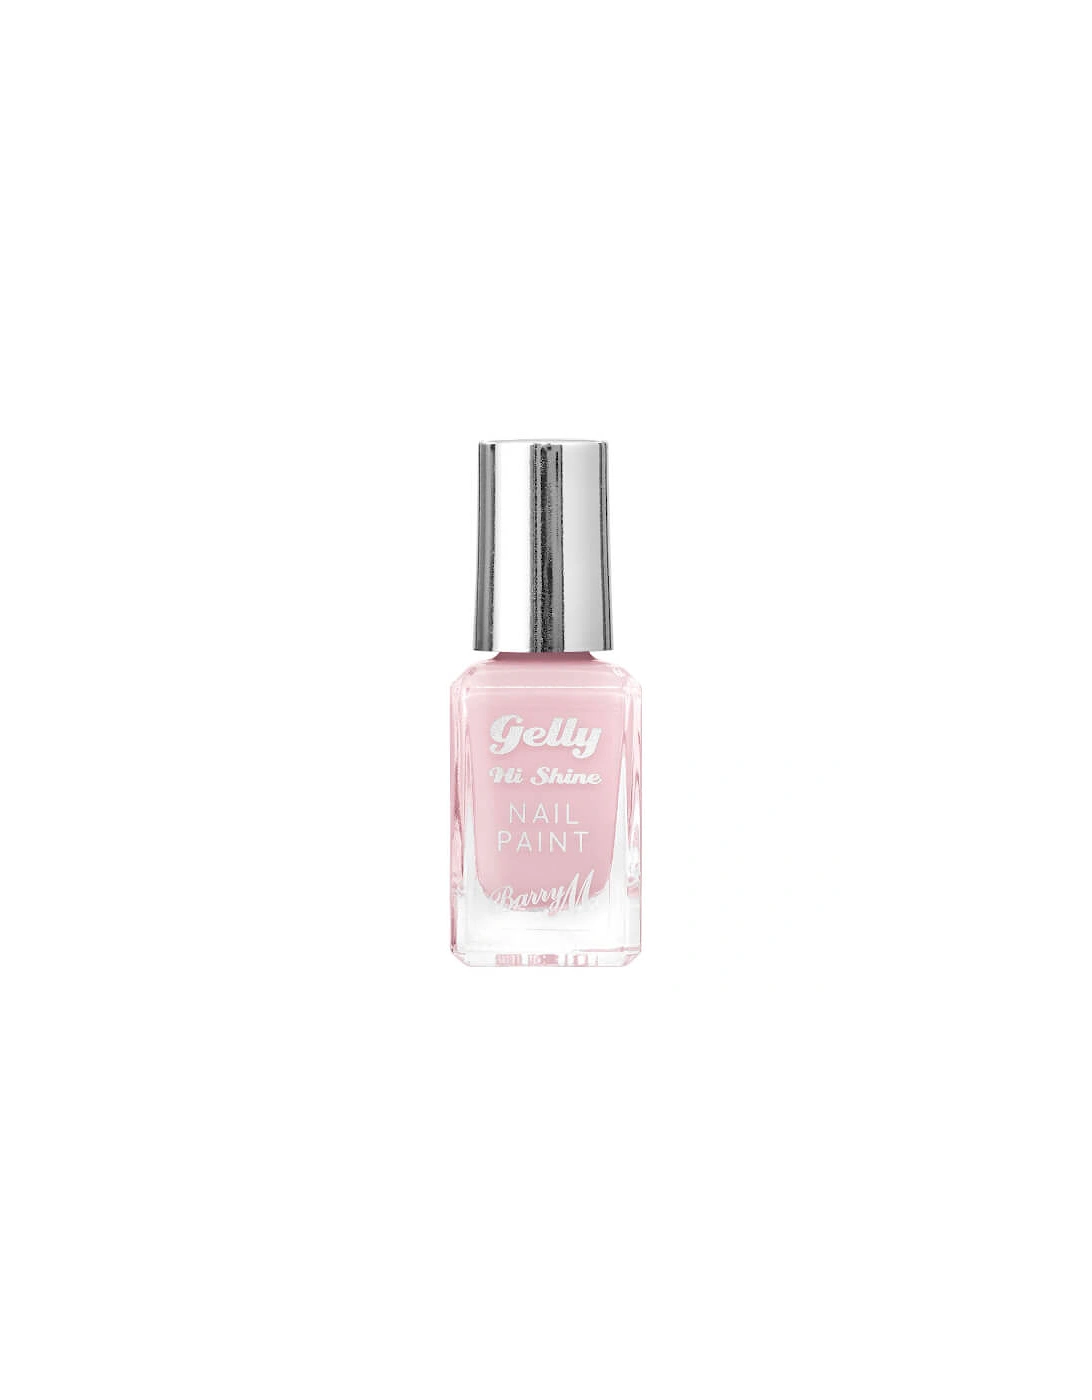 Gelly Hi Shine Nail Paint - Candy Floss, 2 of 1